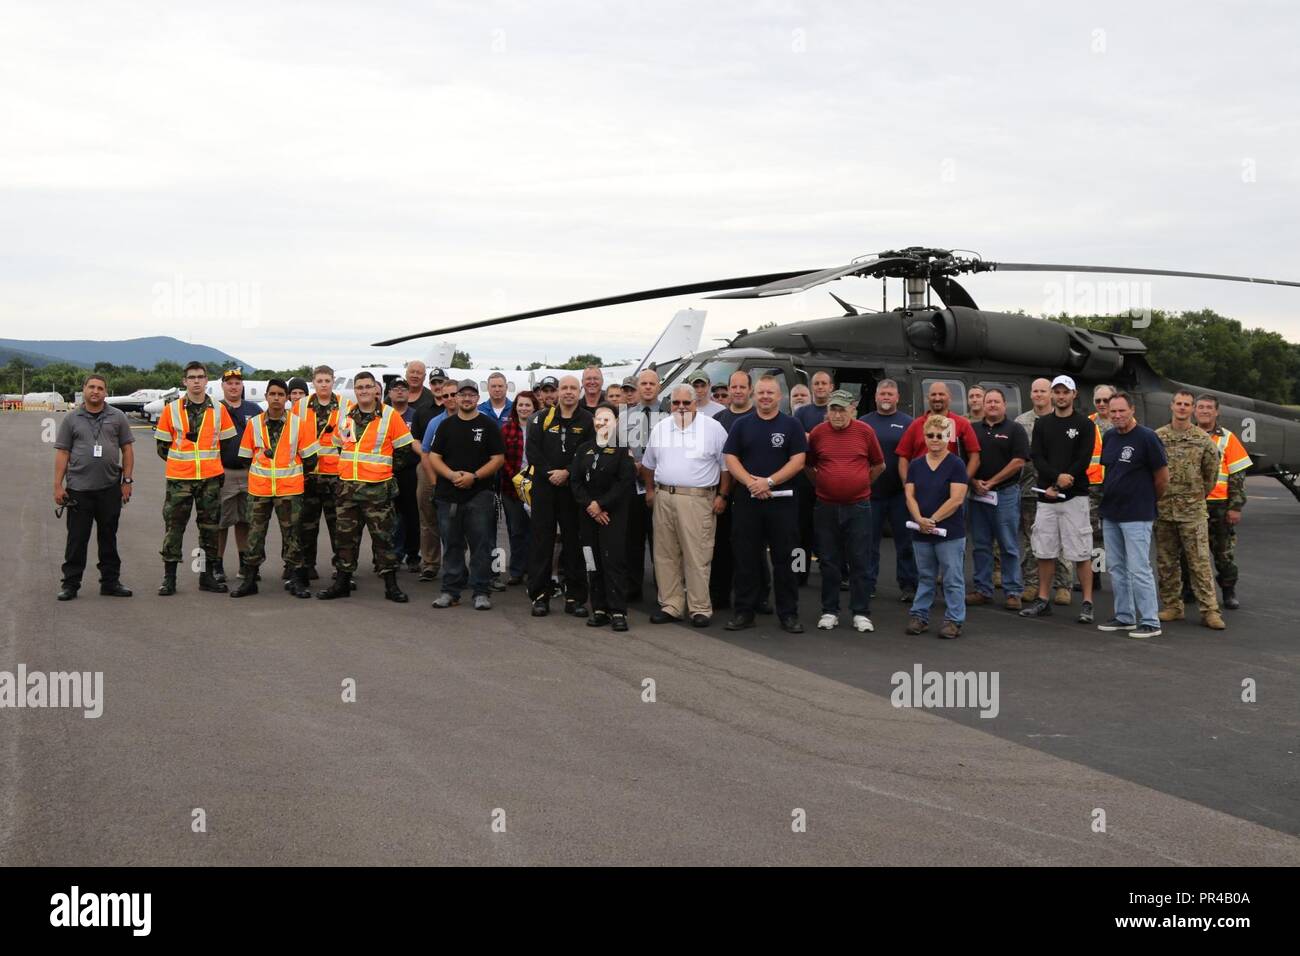 Pennsylvania Army National Guard aviators and members of various civilian organizations including emergency management personnel, Pennsylvania State Police, the Civil Air Patrol, EMS personnel, and other first responders stand side by side for a group photo after a joint aviation training exercise at the Penn Valley Airport in Selinsgrove, Snyder County, Pa. Sept. 8, 2018. The exercise provided the civilian participants with hands-on learning on the UH-60 Blackhawk helicopter, in the event that they should be the first to arrive on-scene at a potential crash site of the Pennsylvania Army Natio Stock Photo